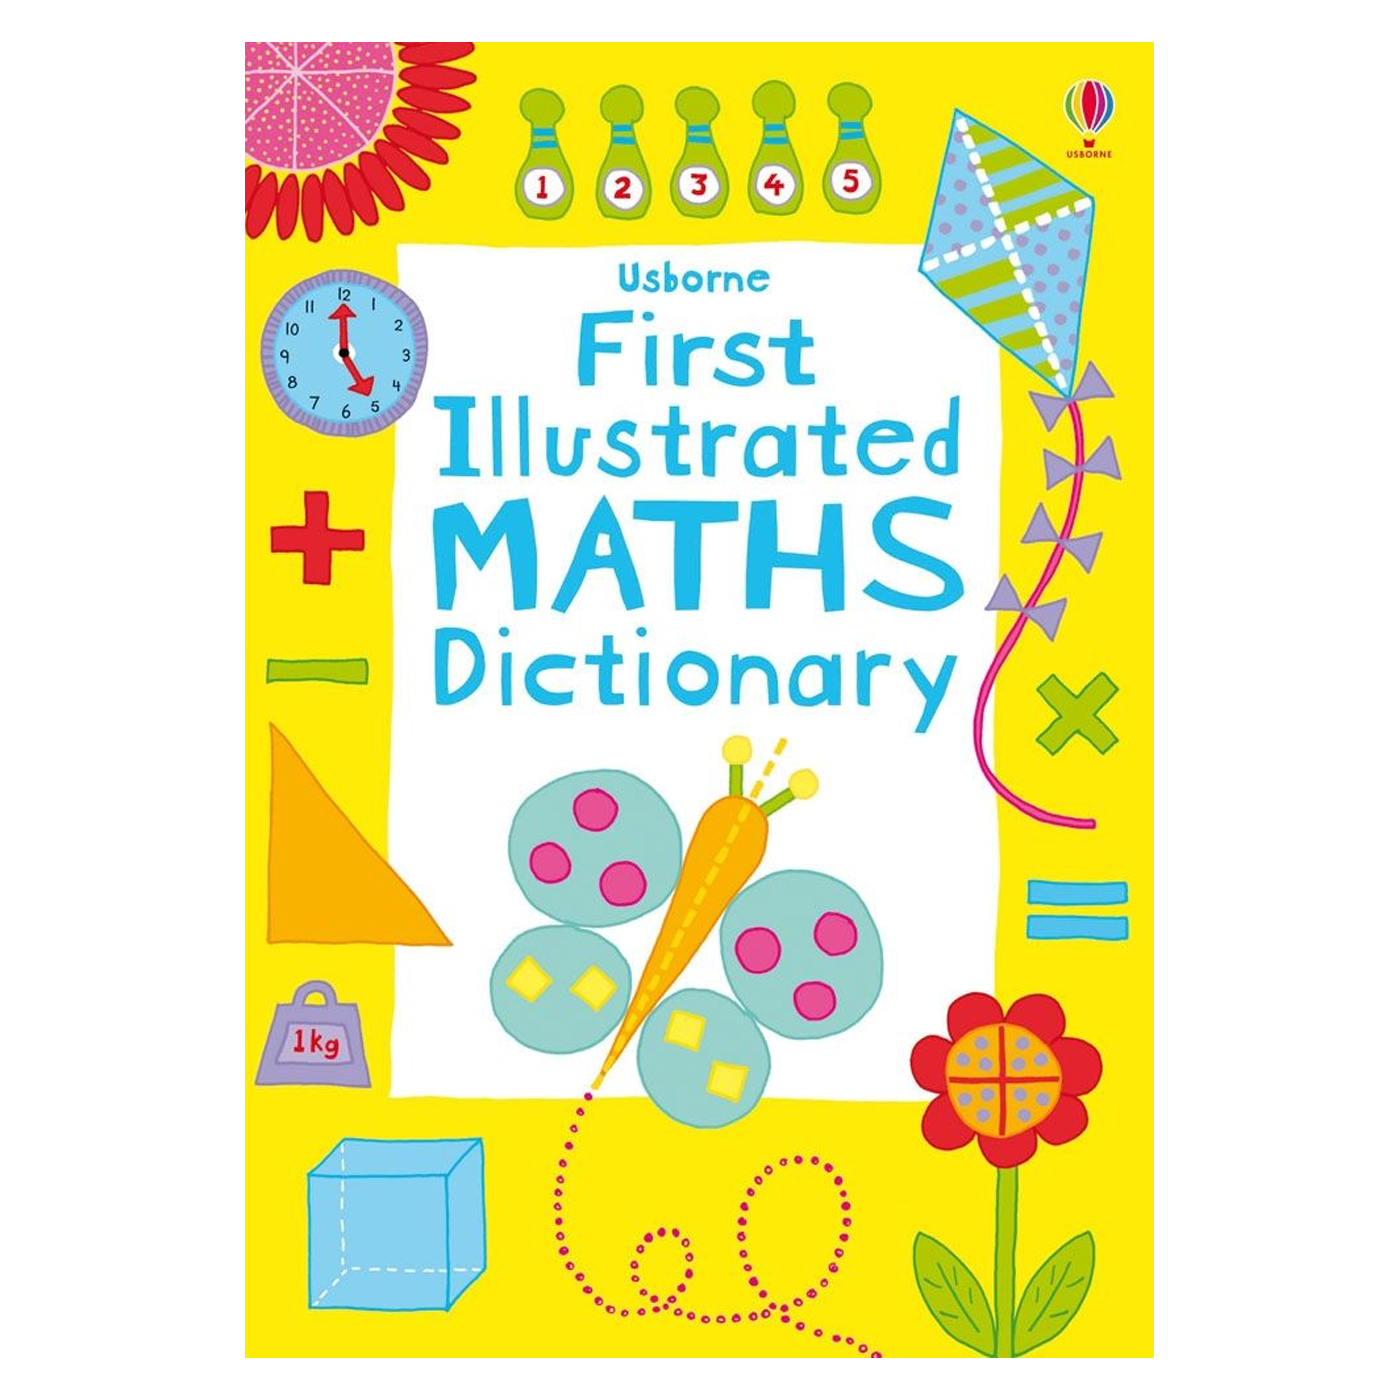  First Illustrated Maths Dictionary